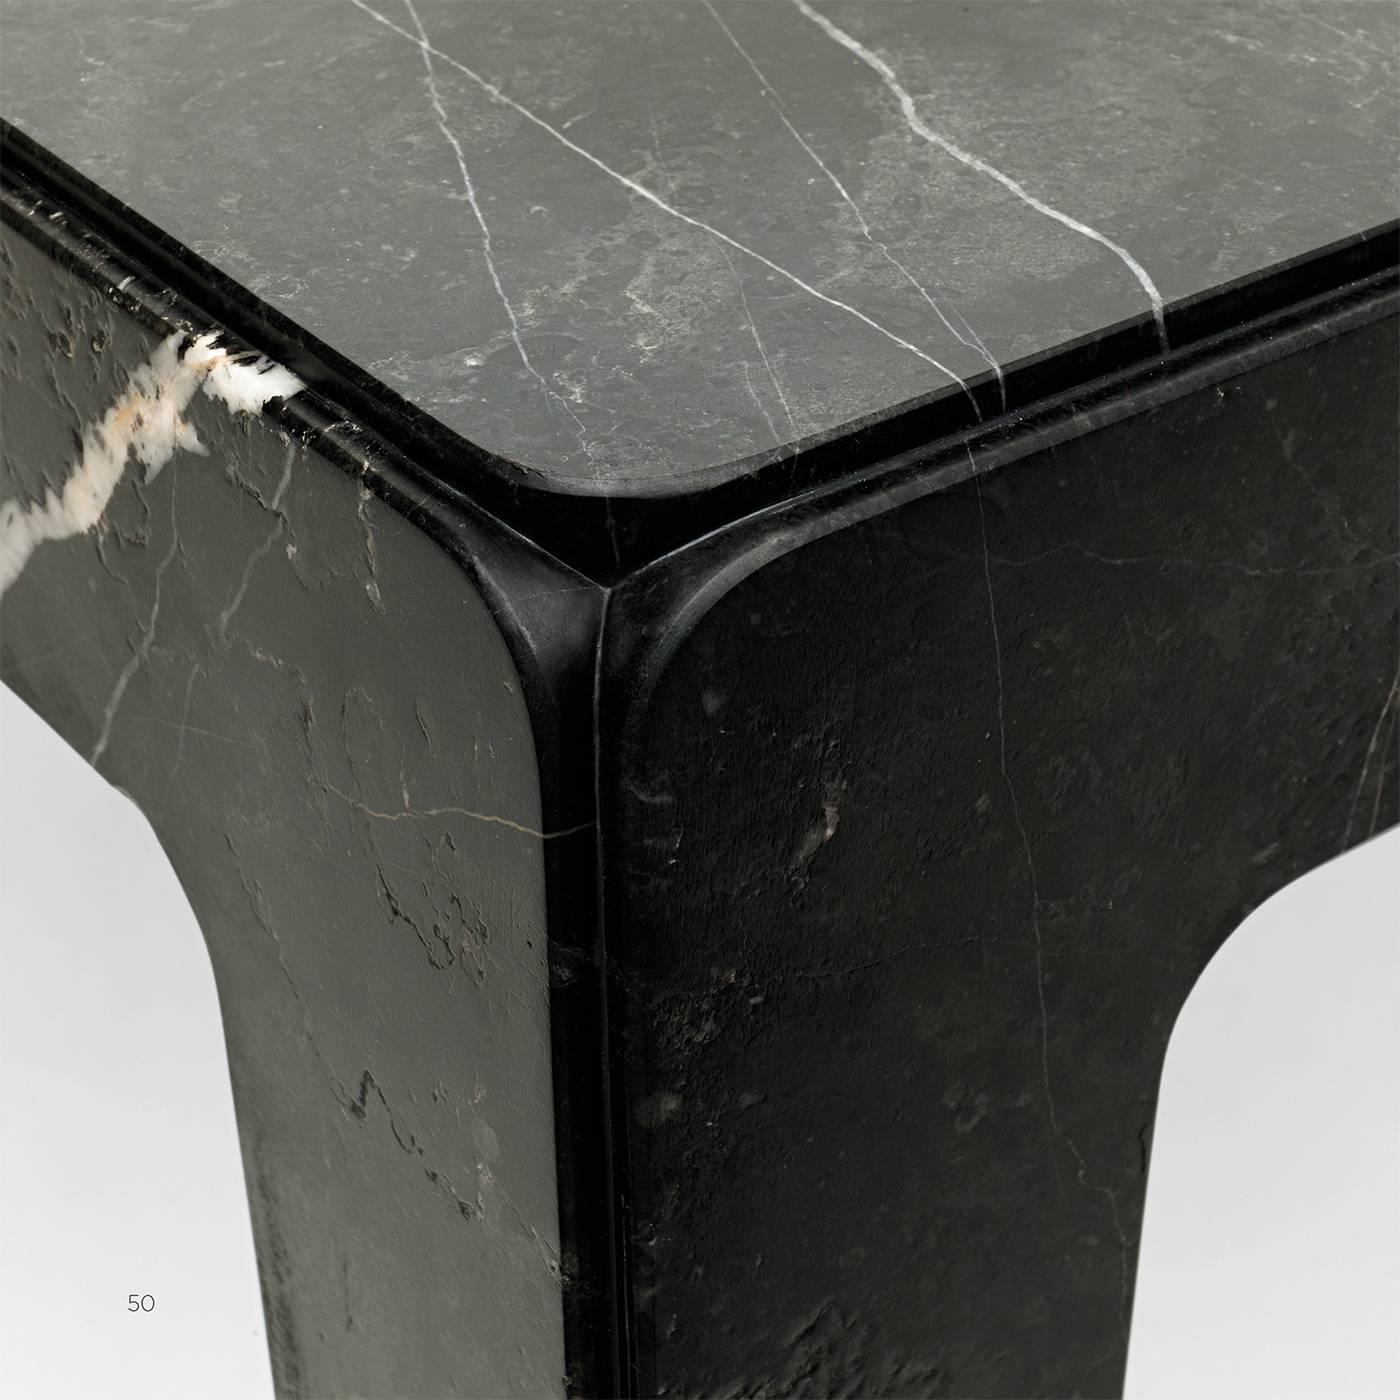 This elegant coffee table, part of the Rock collection designed by Alberto Colzani in 2013, is crafted of elegant New Saint Laurent marble. The sumptuous allure of the stone, treated with a weathered finish that makes it appear even more